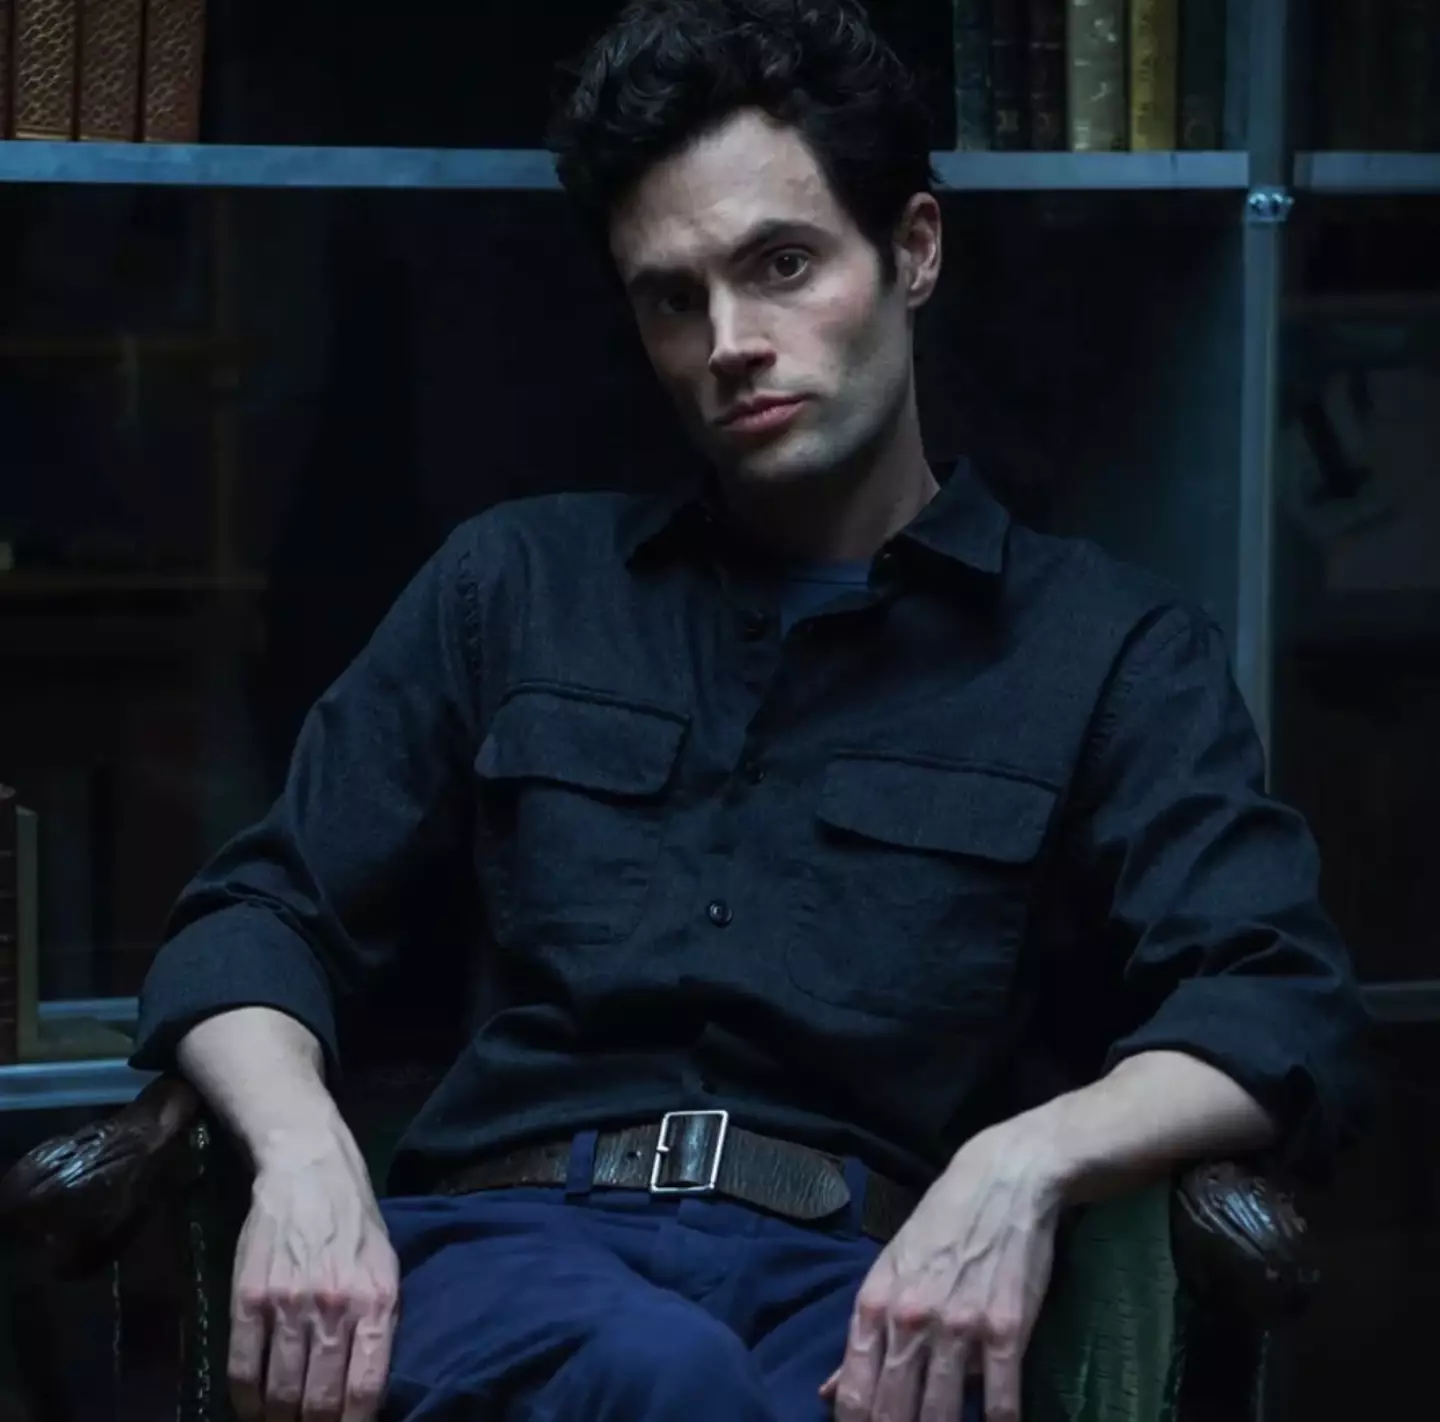 Penn Badgley said he's always told to be 'less creepy' when filming the masturbation scenes.